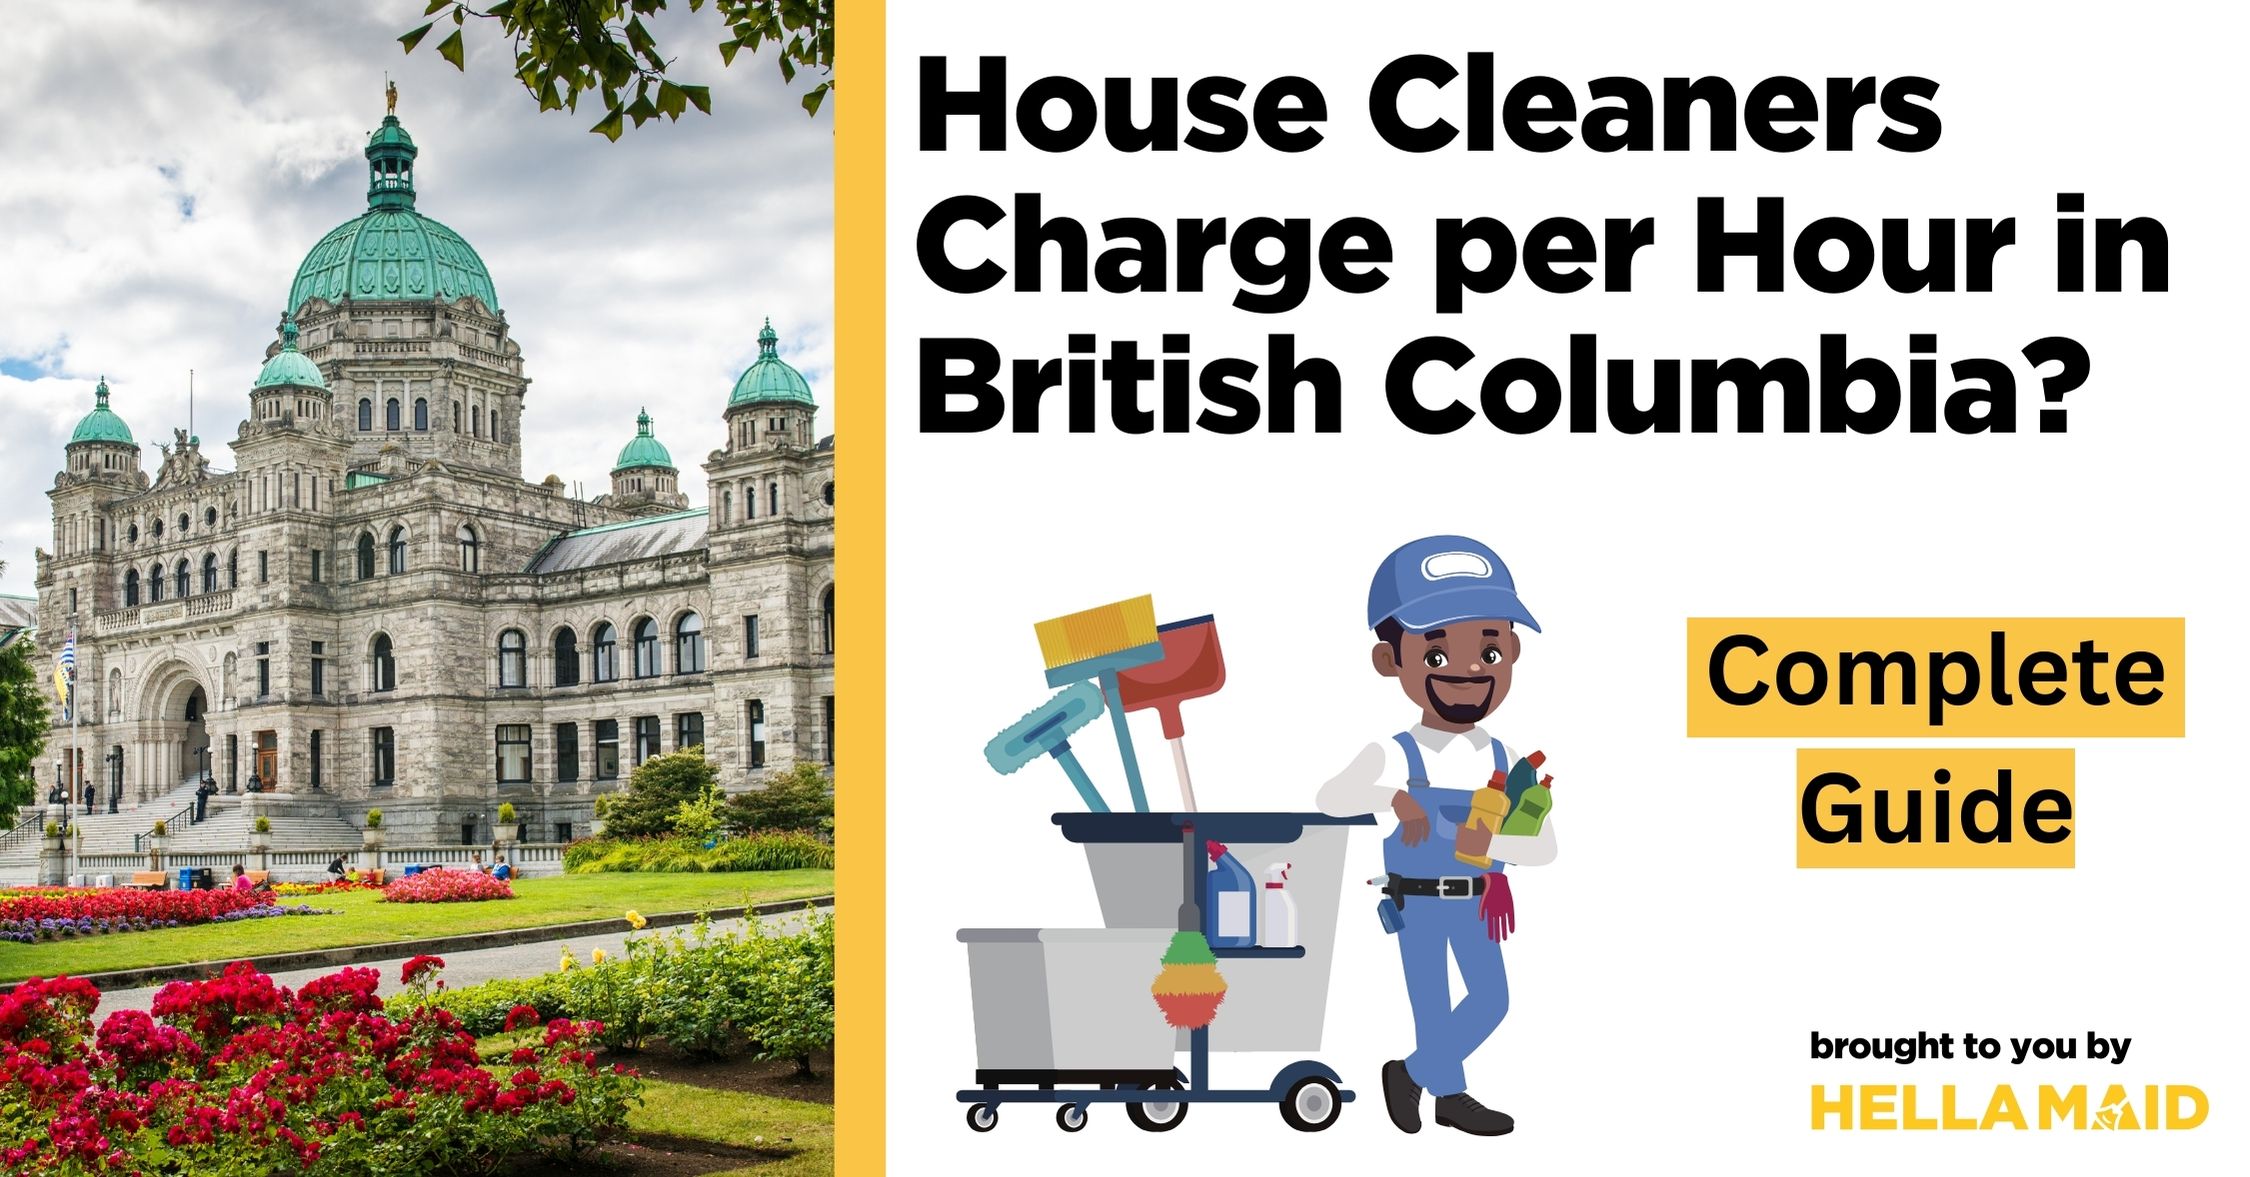 house cleaners charge per hour British Columbia